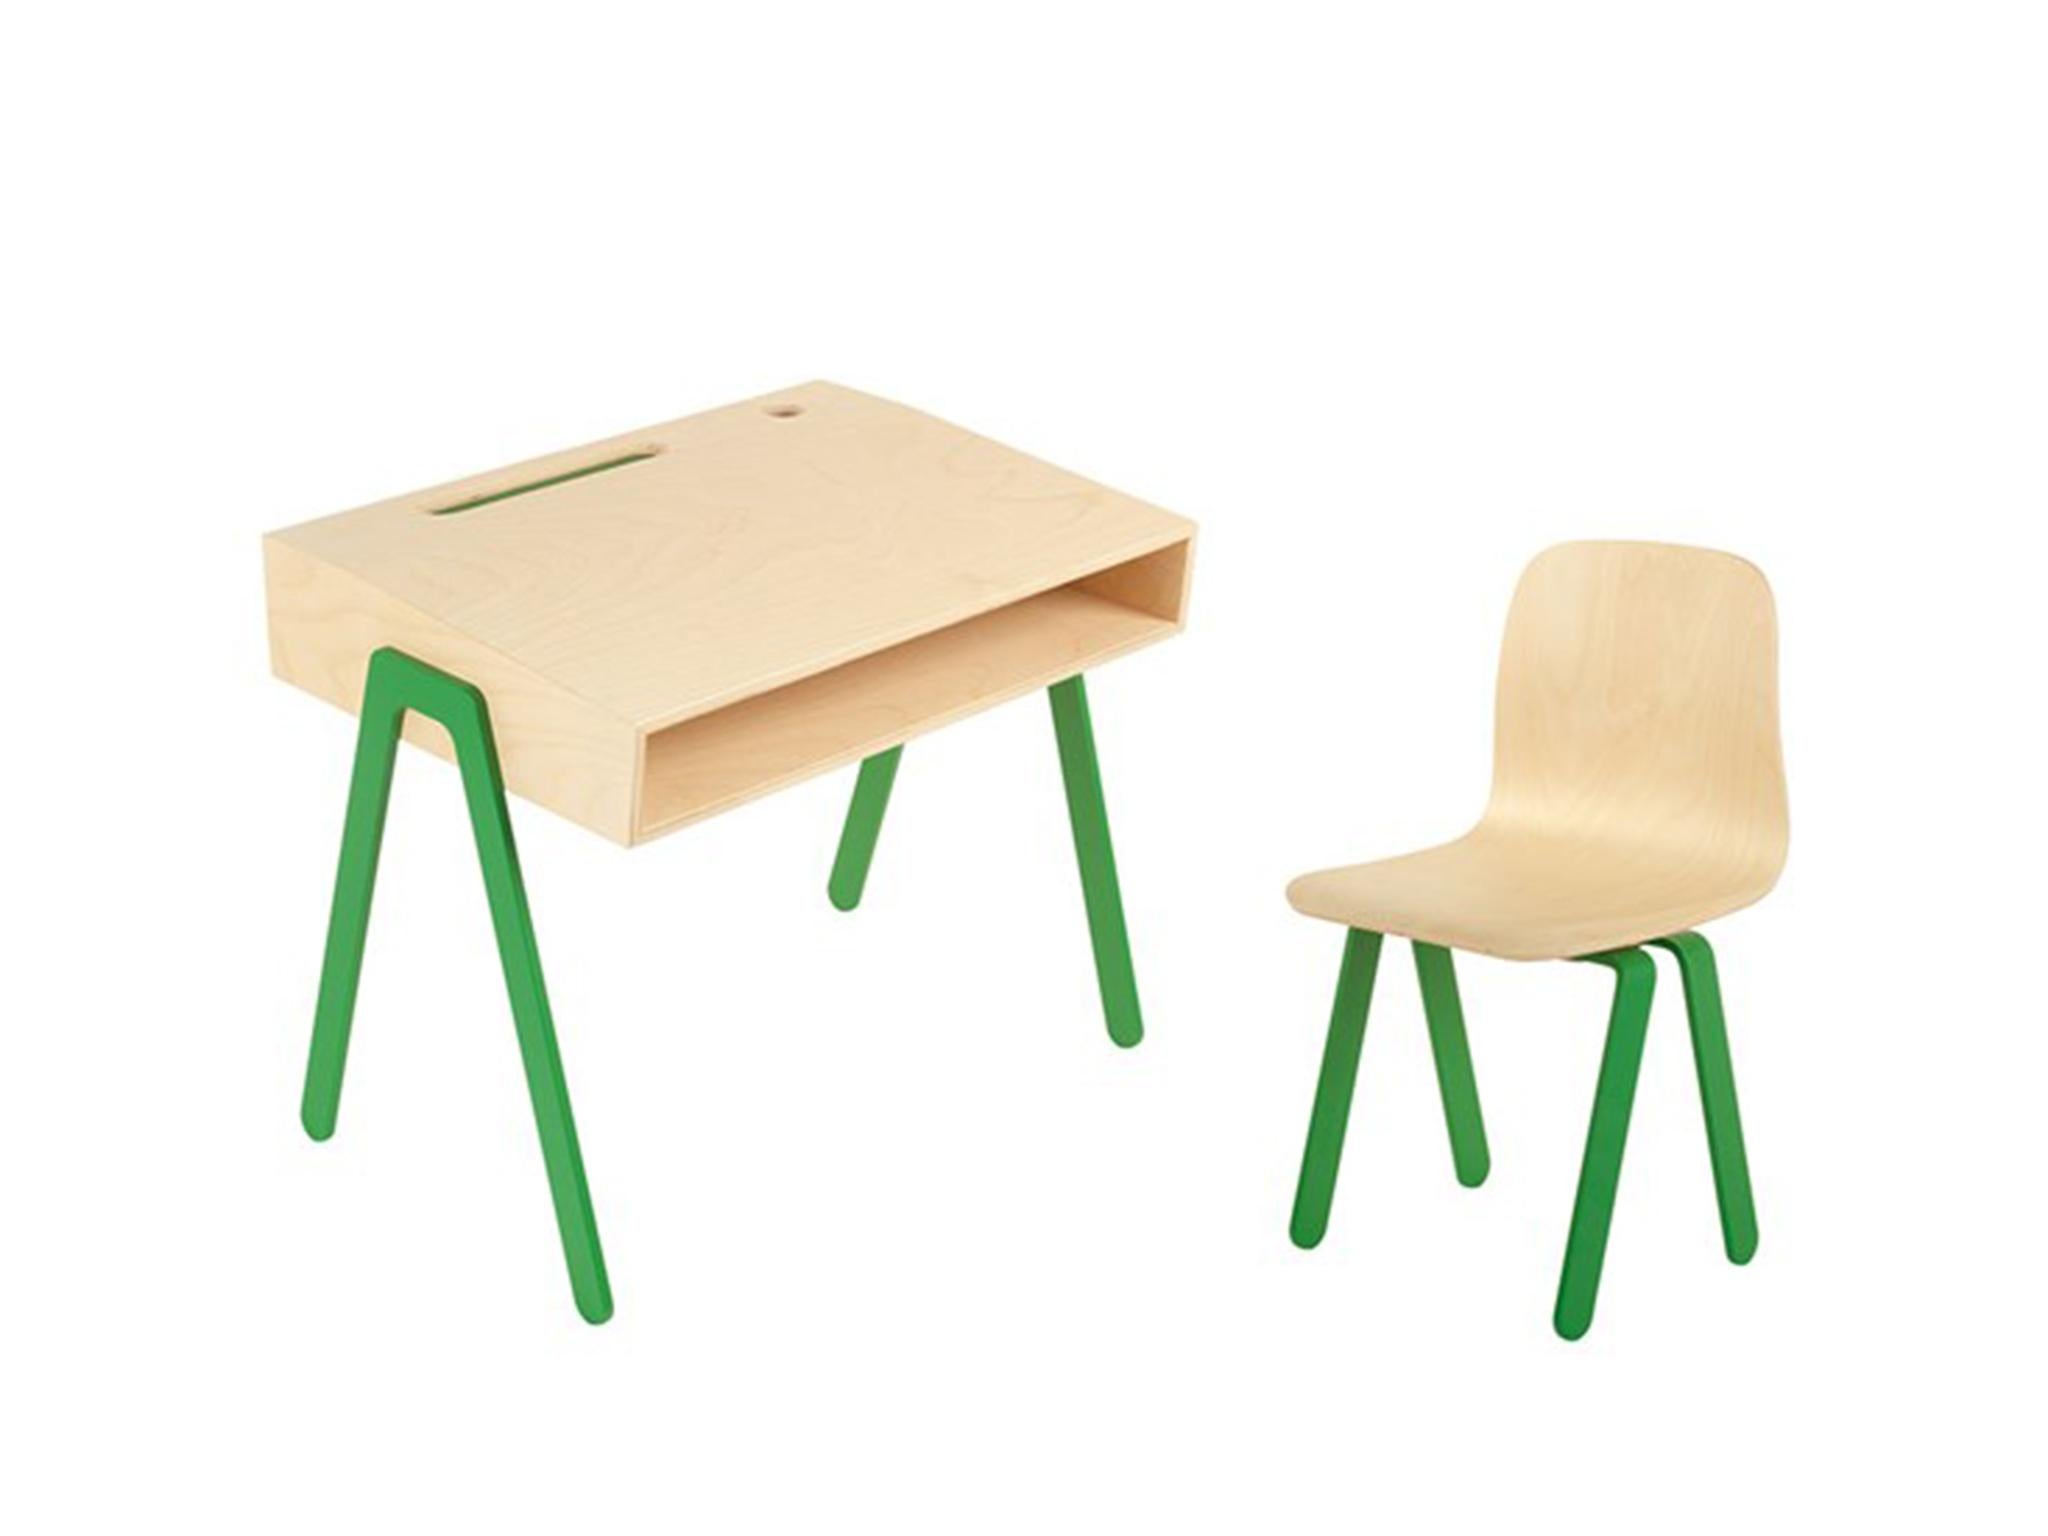 children's mini table and chairs